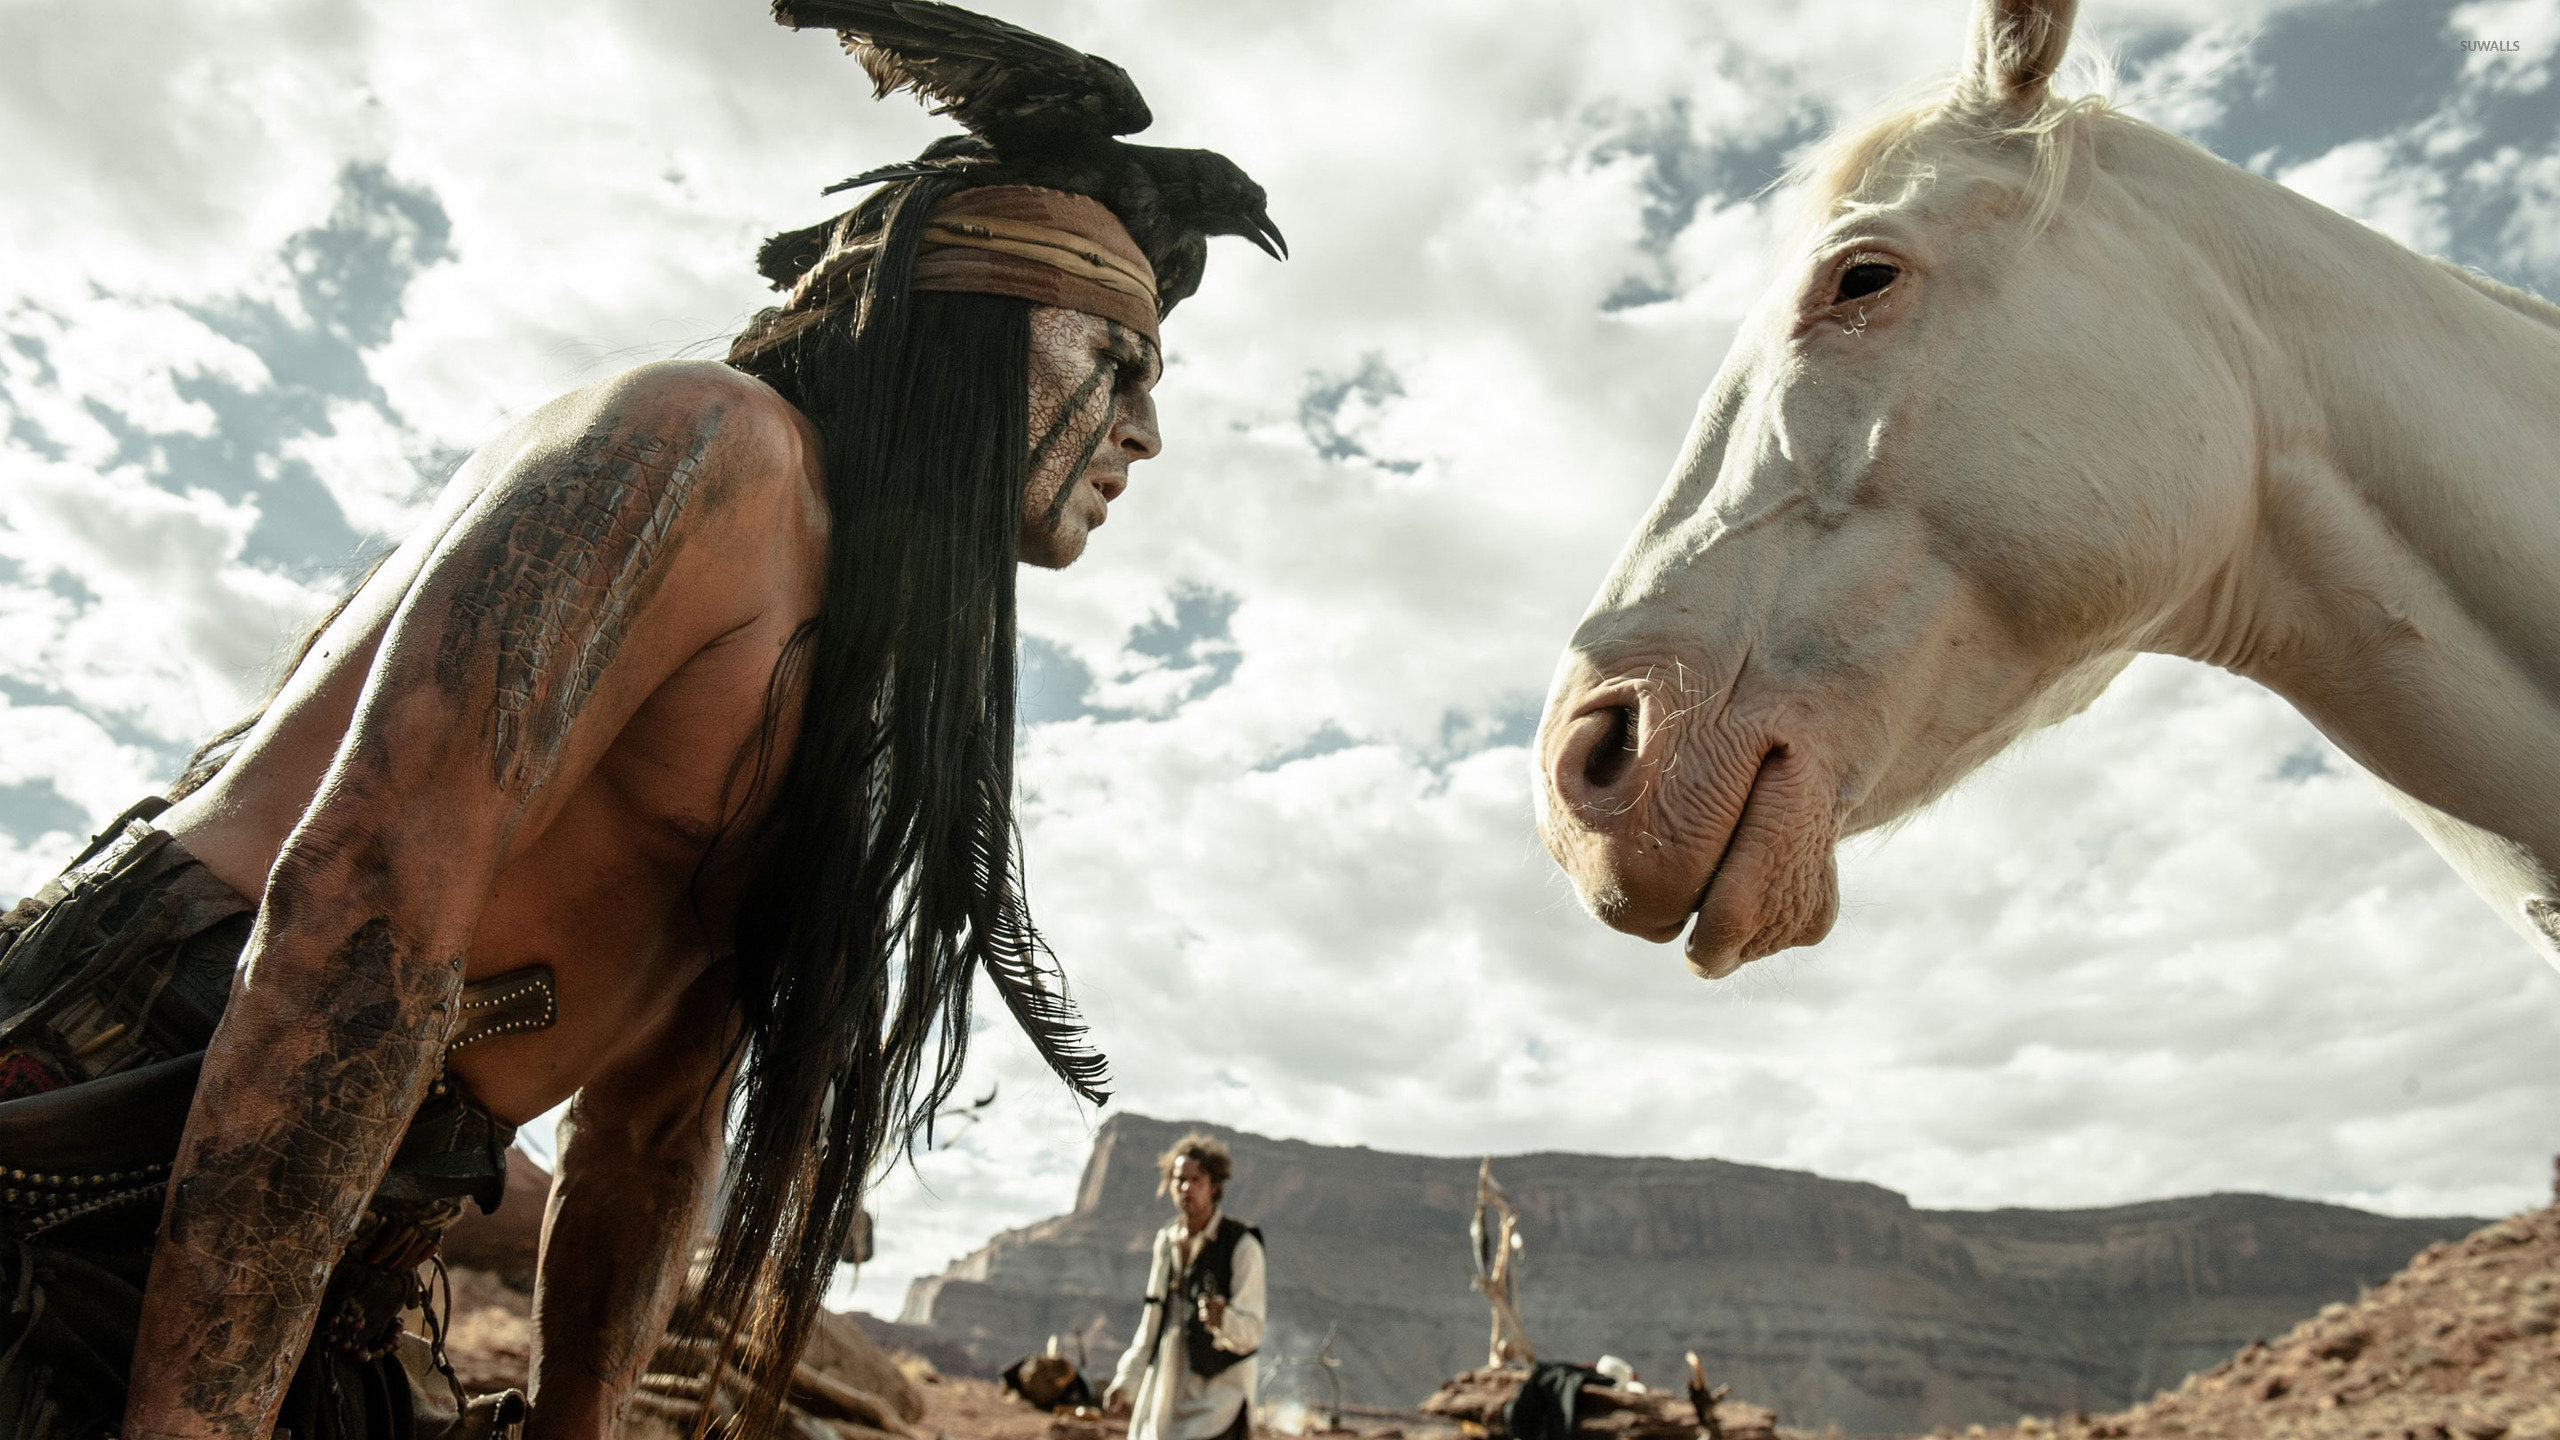 Tonto - The Lone Ranger wallpaper - Movie wallpapers - #20764